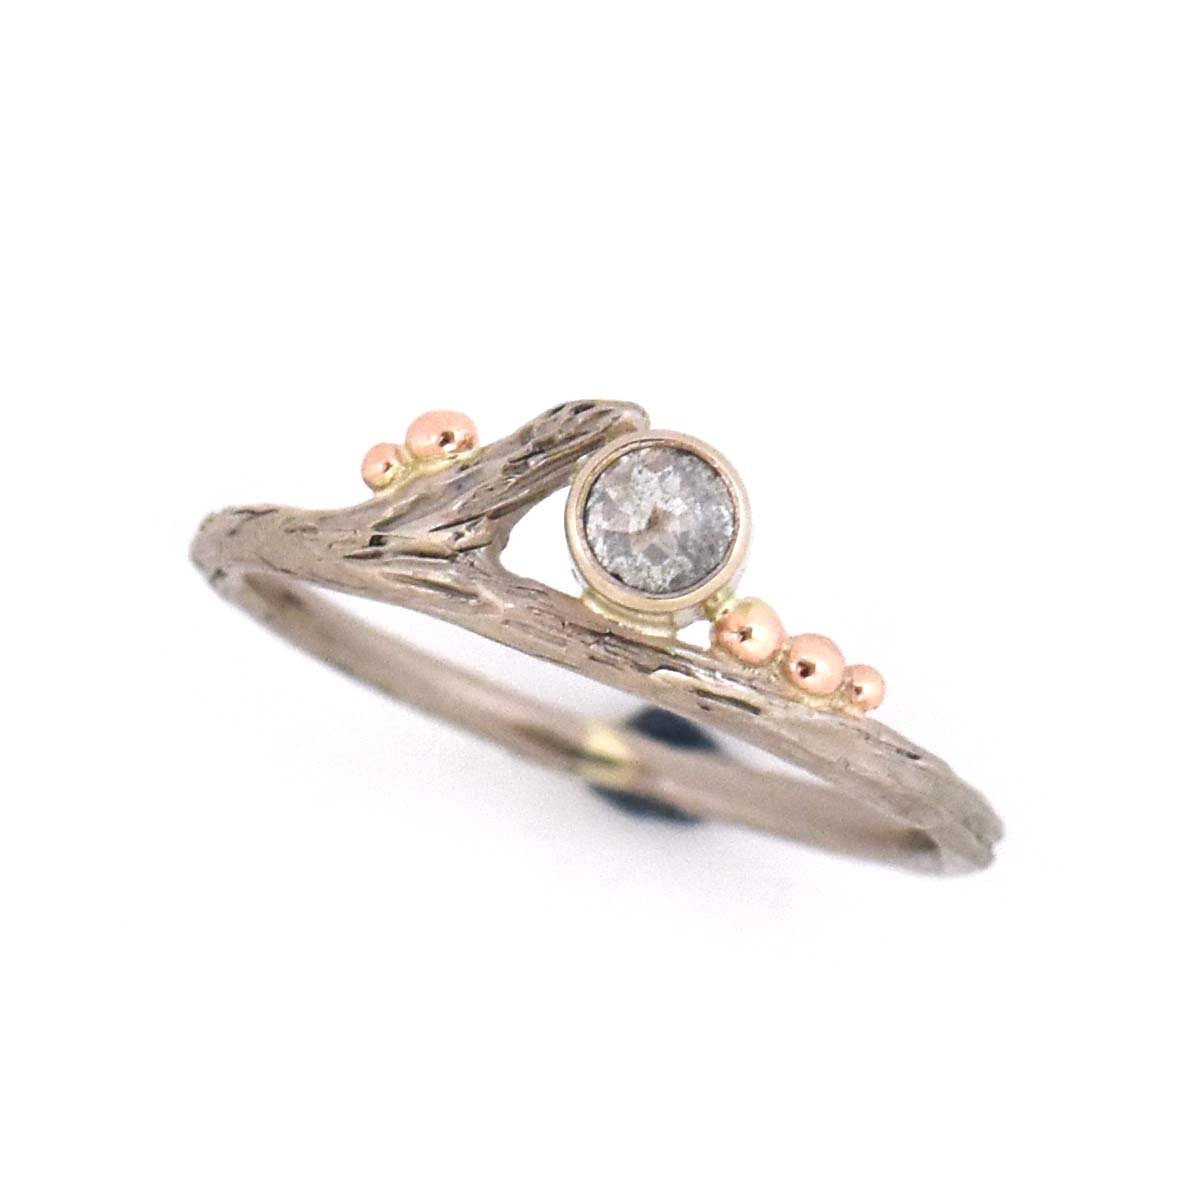 Gold Enchanted Rustic Diamond Twig Ring - your choice of gold - Wedding Ring 18K Palladium White Gold / Rustic Diamond 14K Rose Gold / Rustic Diamond 3447 - handmade by Beth Millner Jewelry